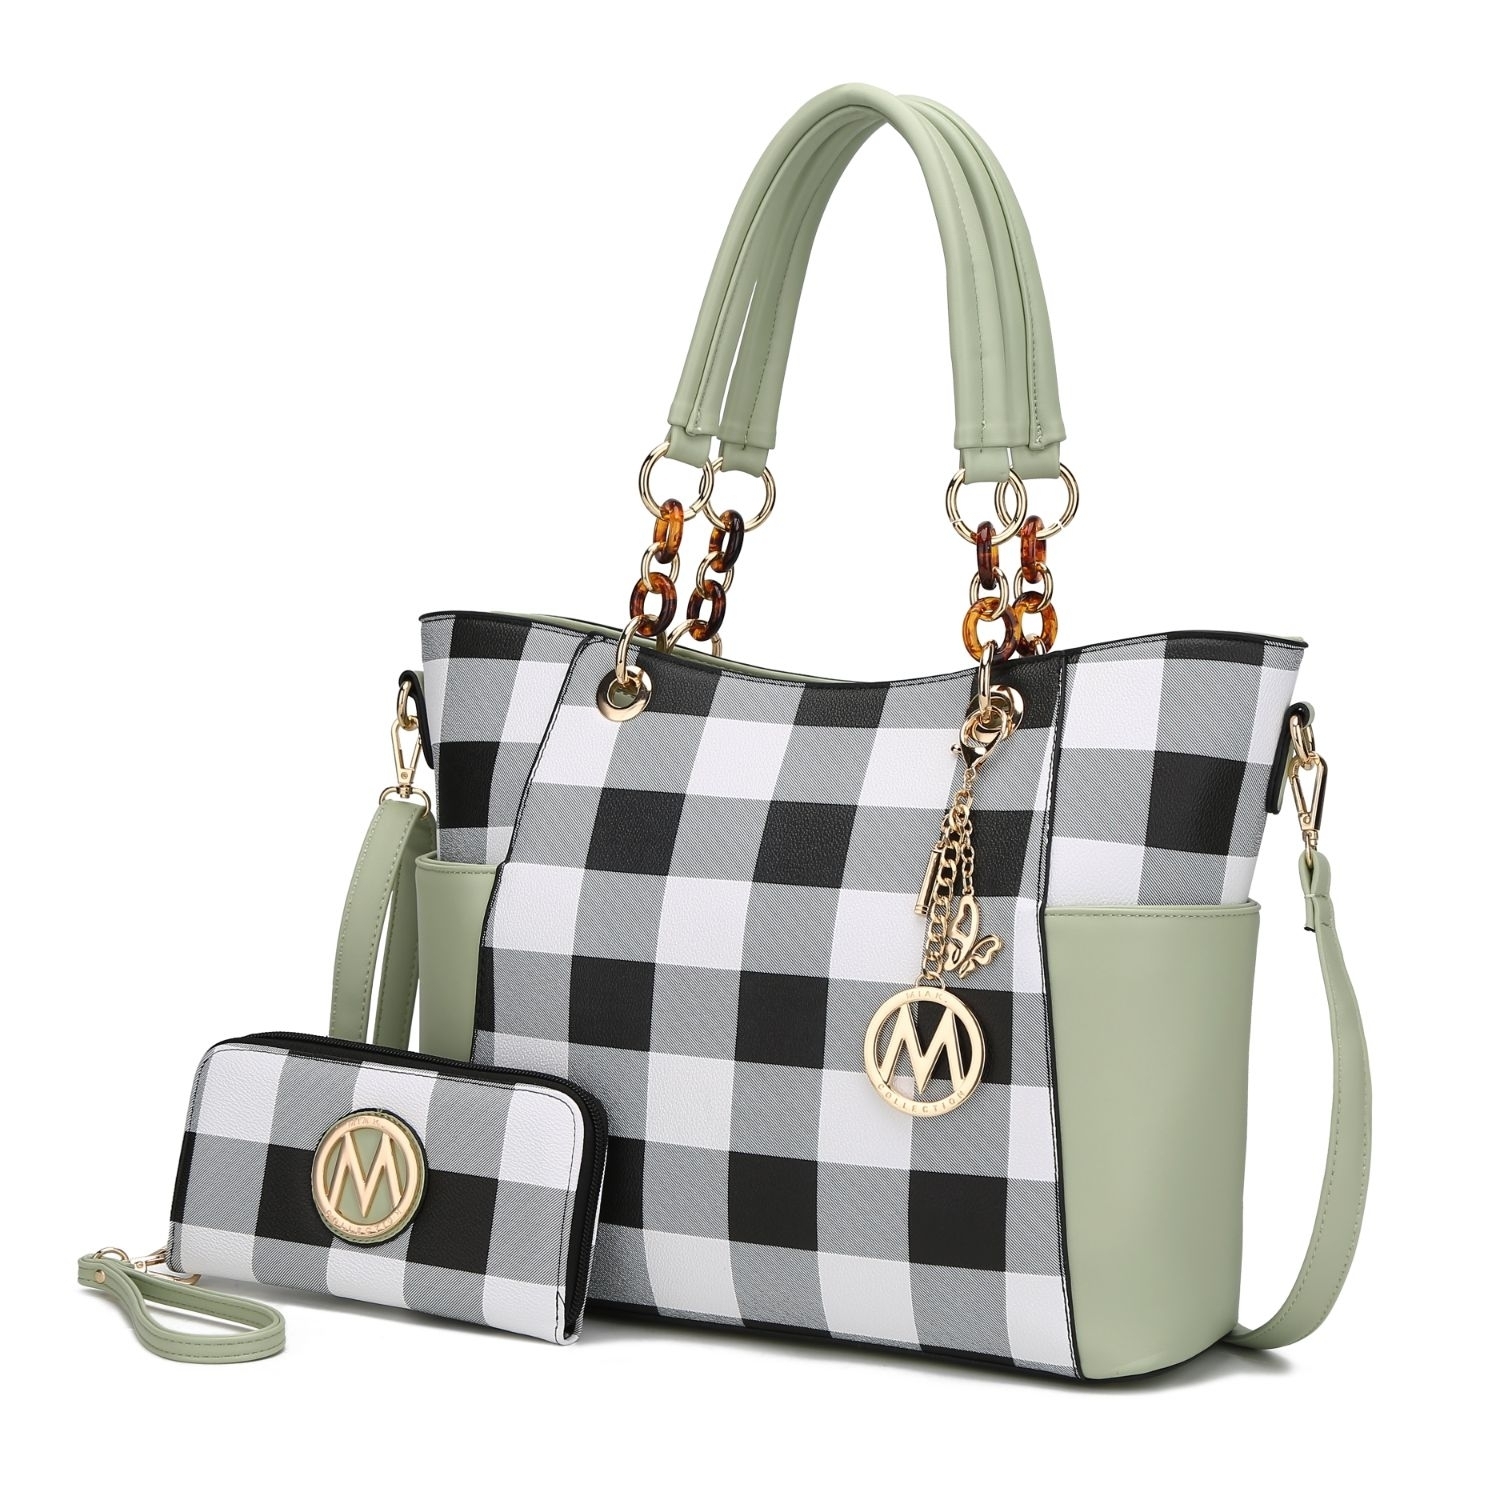 Bonita Checkered Tote 2 Pcs Wome's Large Handbag With Wallet And Decorative M Keychain By Mia K. - Mint